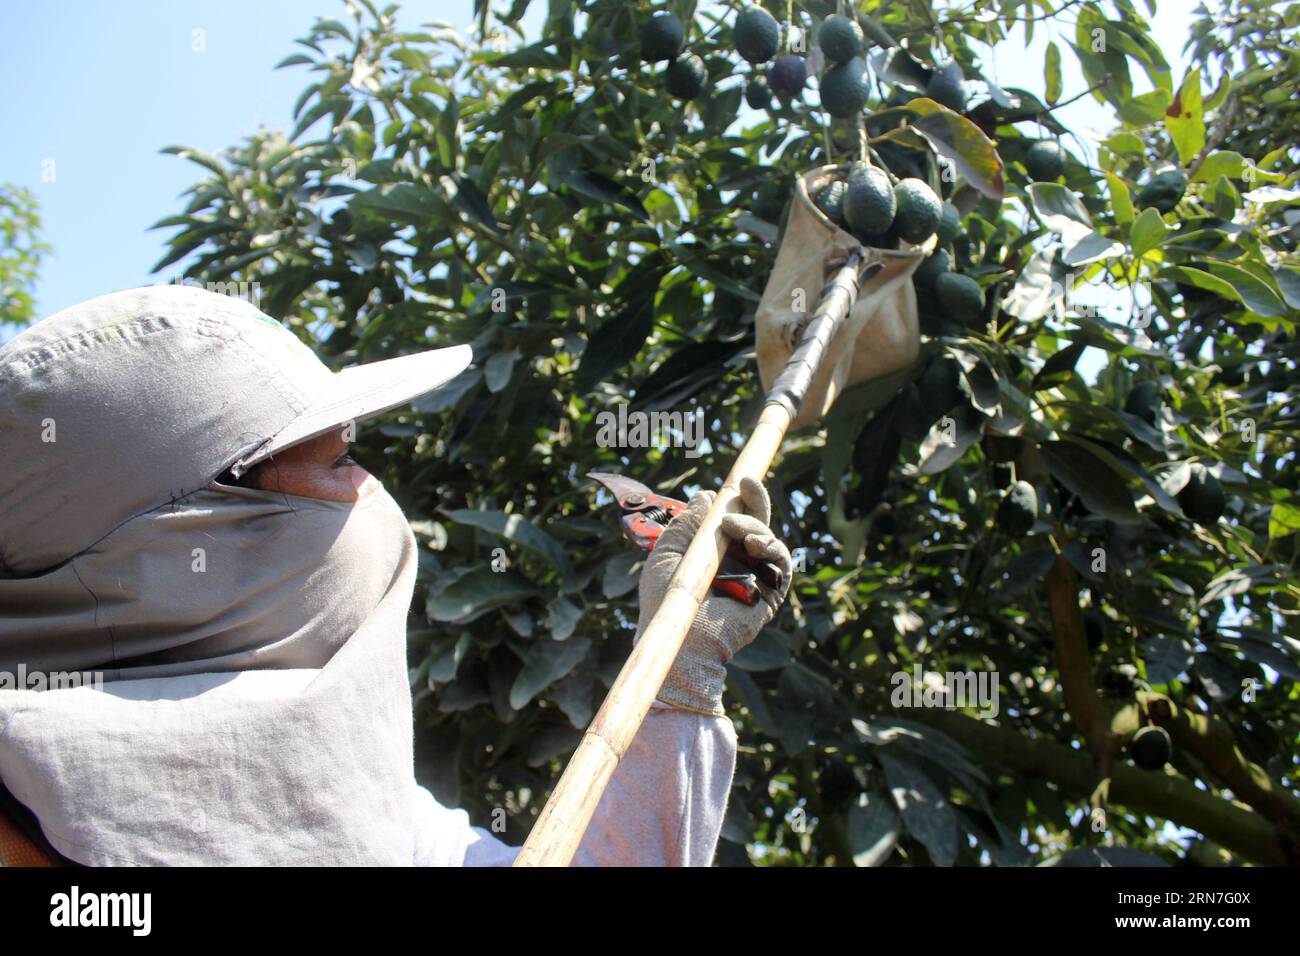 (150905) -- CHINCHA,  - Image taken on Sept. 3, 2015 shows a farmer collecting Hass avocados in El Carmen, Chincha province, Ica department, Peru. The Hass avocado, once matured, can remain on the tree for several months witout apparent deterioration, especially in cooler weather. The 8th World Avocado Congress will be held in the city of Lima, Peru, from Sept. 13 to Sept. 18. ) (vf) PERU-CHINCHA-INDUSTRY-AVOCADO-FEATURE LuisxCamacho PUBLICATIONxNOTxINxCHN   150905 Chincha Image Taken ON Sept 3 2015 Shows a Farmer collecting Hatred Avocados in El Carmen Chincha Province ICA Department Peru The Stock Photo